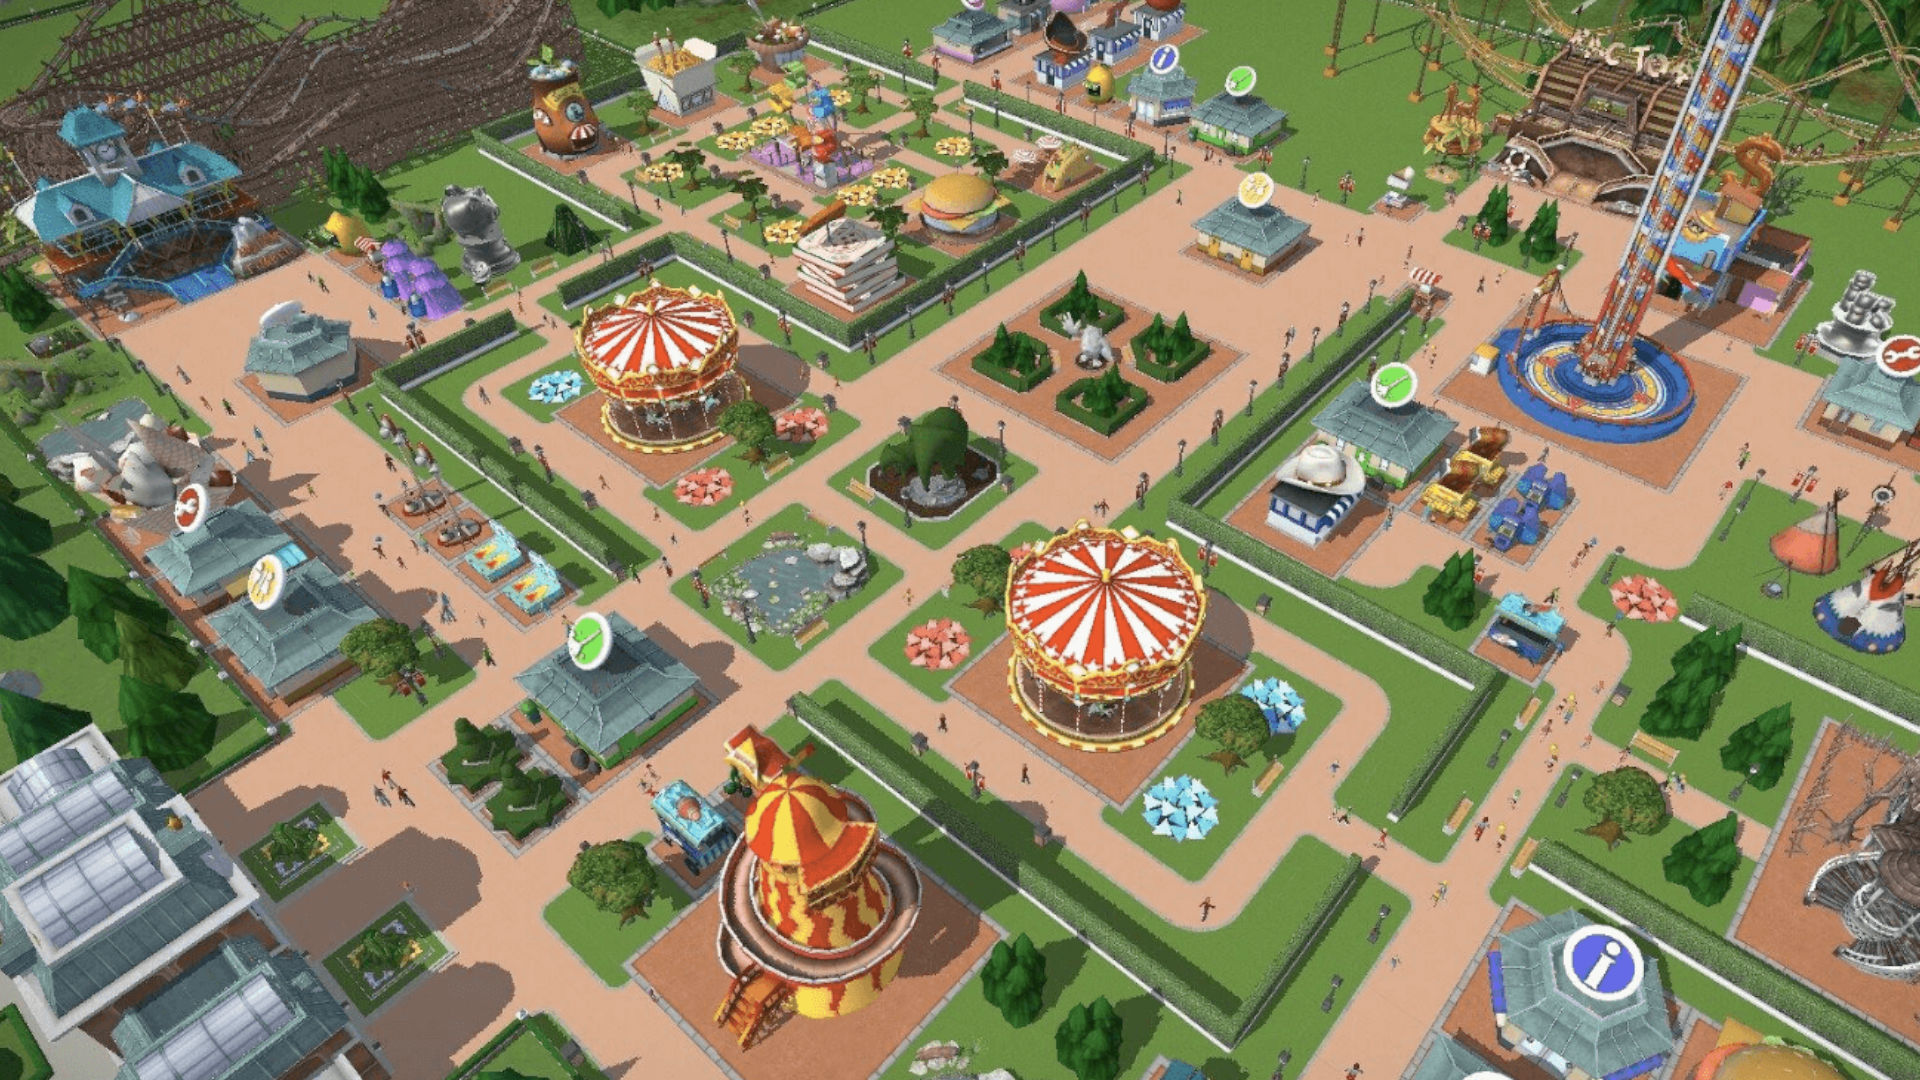 Player finishes theme park in Rollercoaster Tycoon 2 after a decade -  Glorious Gaming